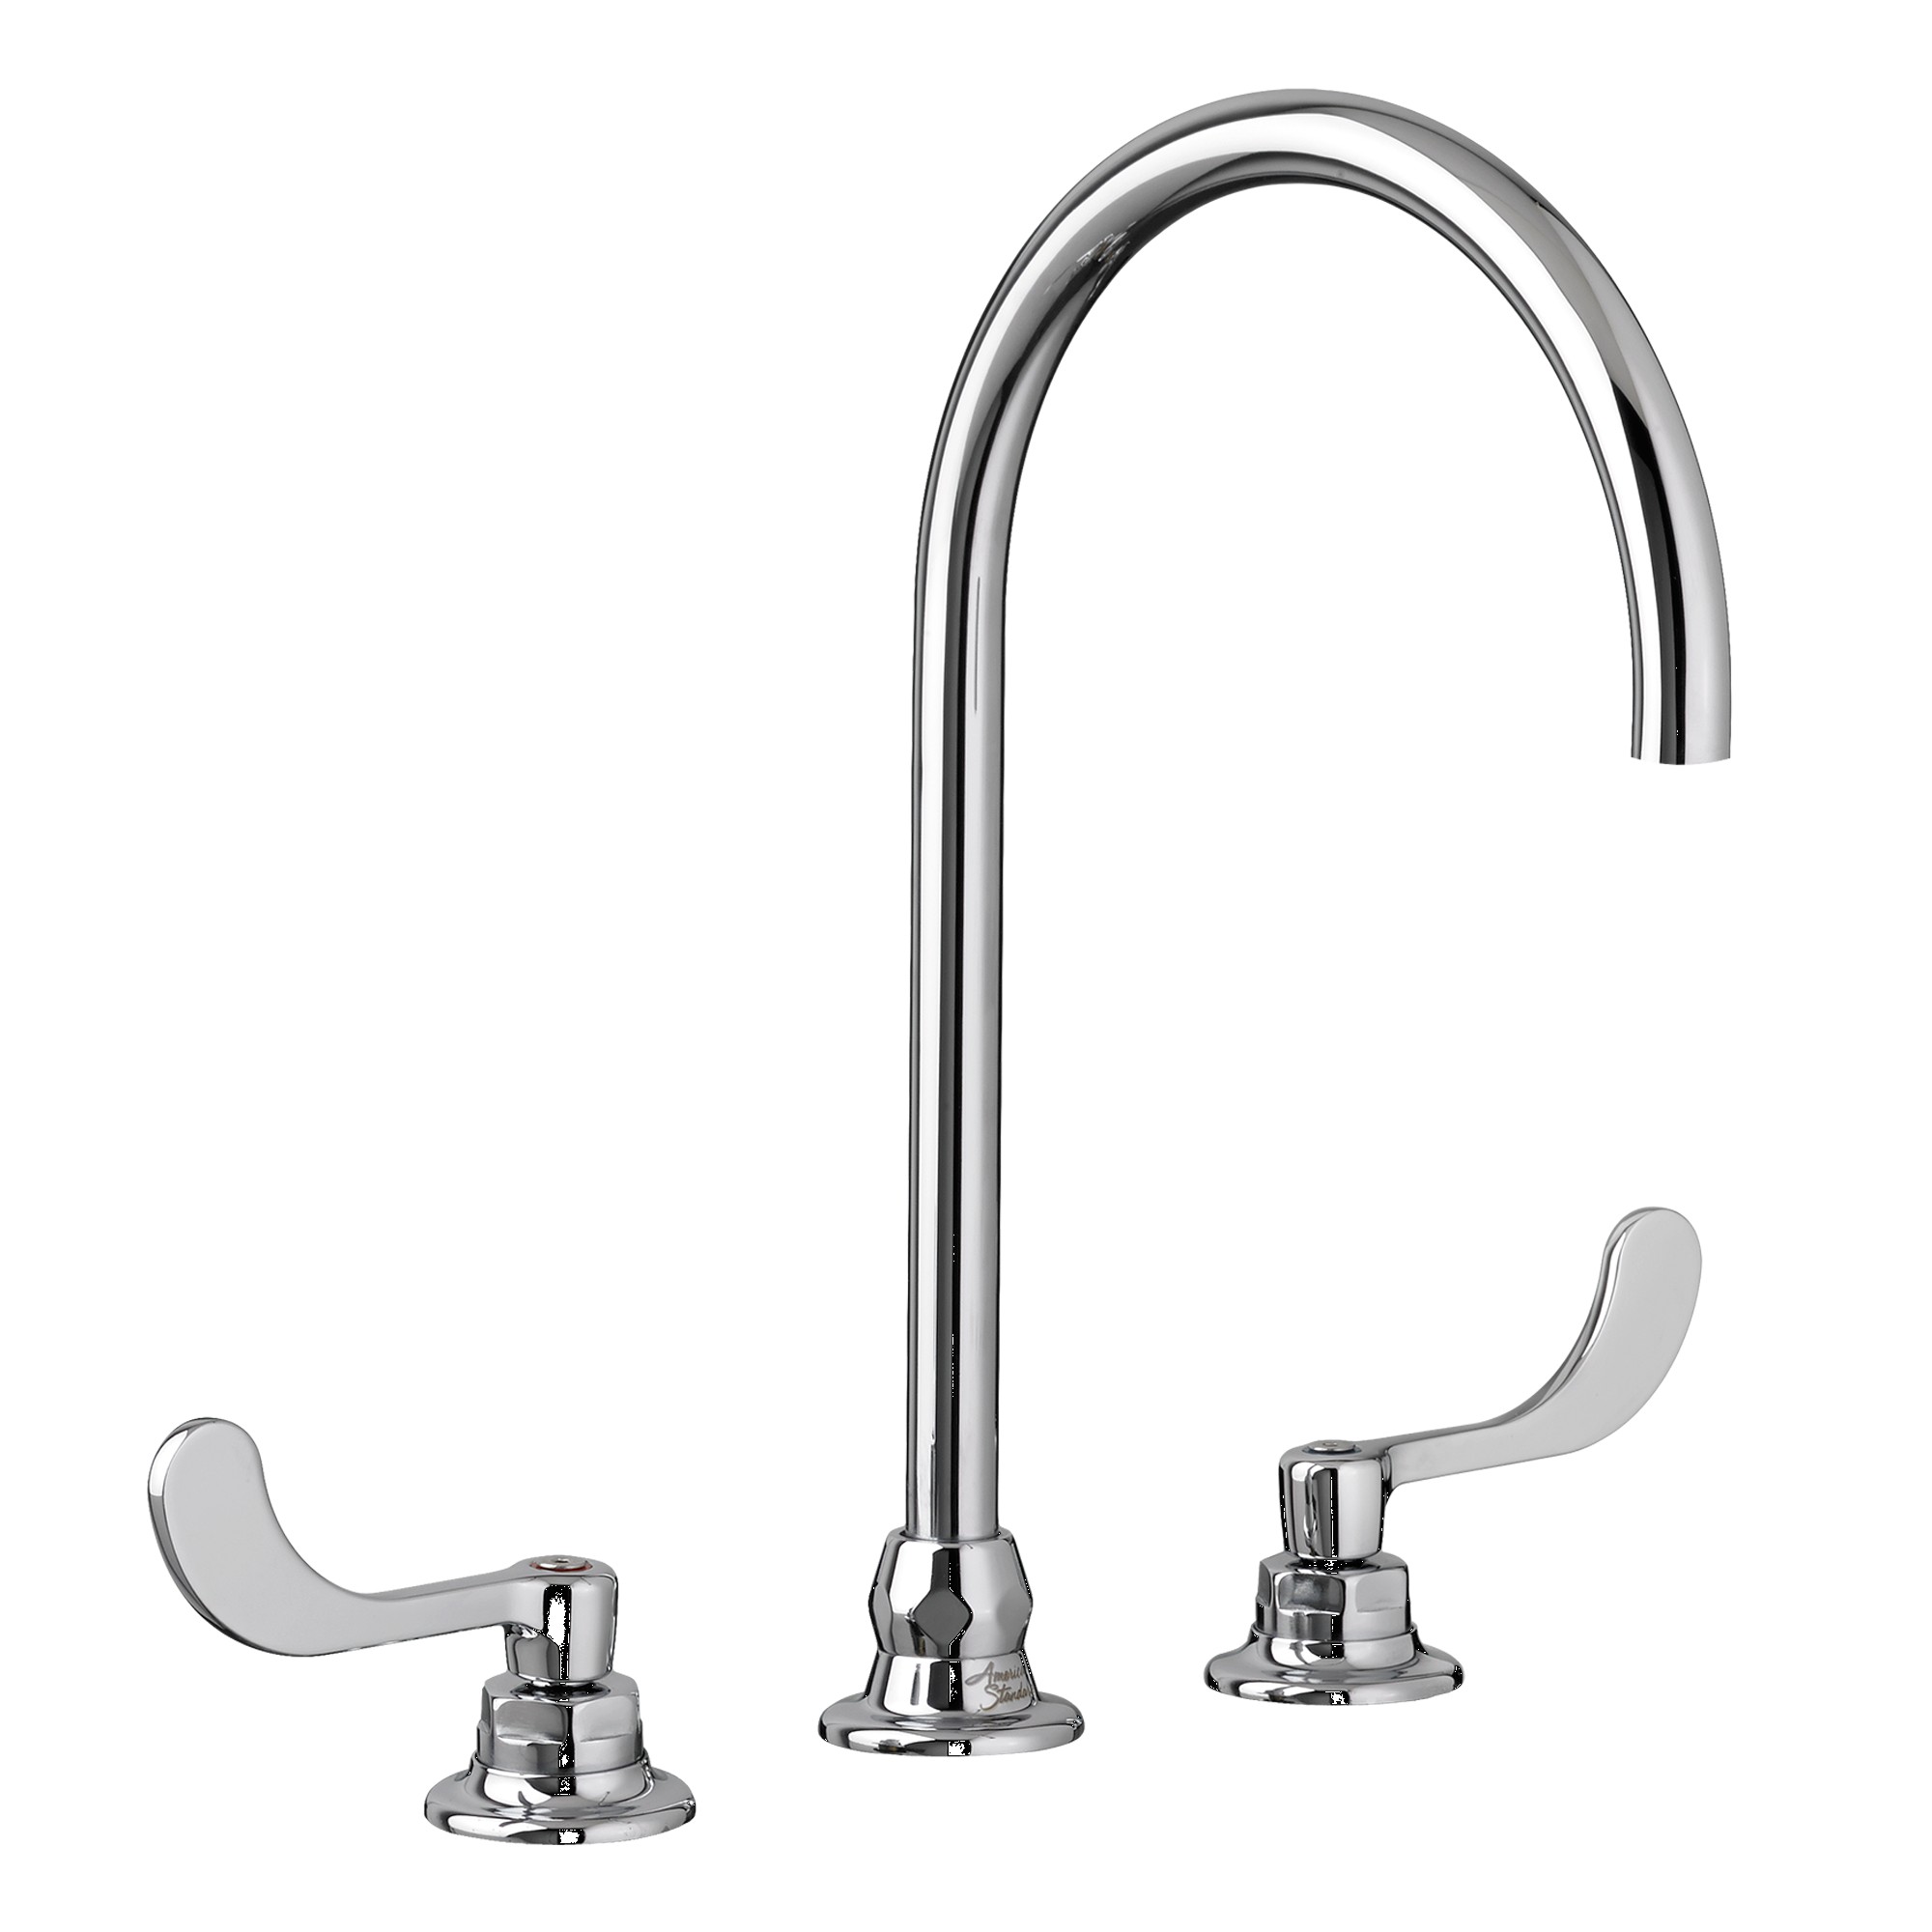 American Standard | 6540.188.002 | AMERICAN STANDARD 6540.188 MONTERREY WIDESPREAD LAVATORY FAUCET CP 002 POLISHED CHROME 1.5GPM LAMINAR FLOW